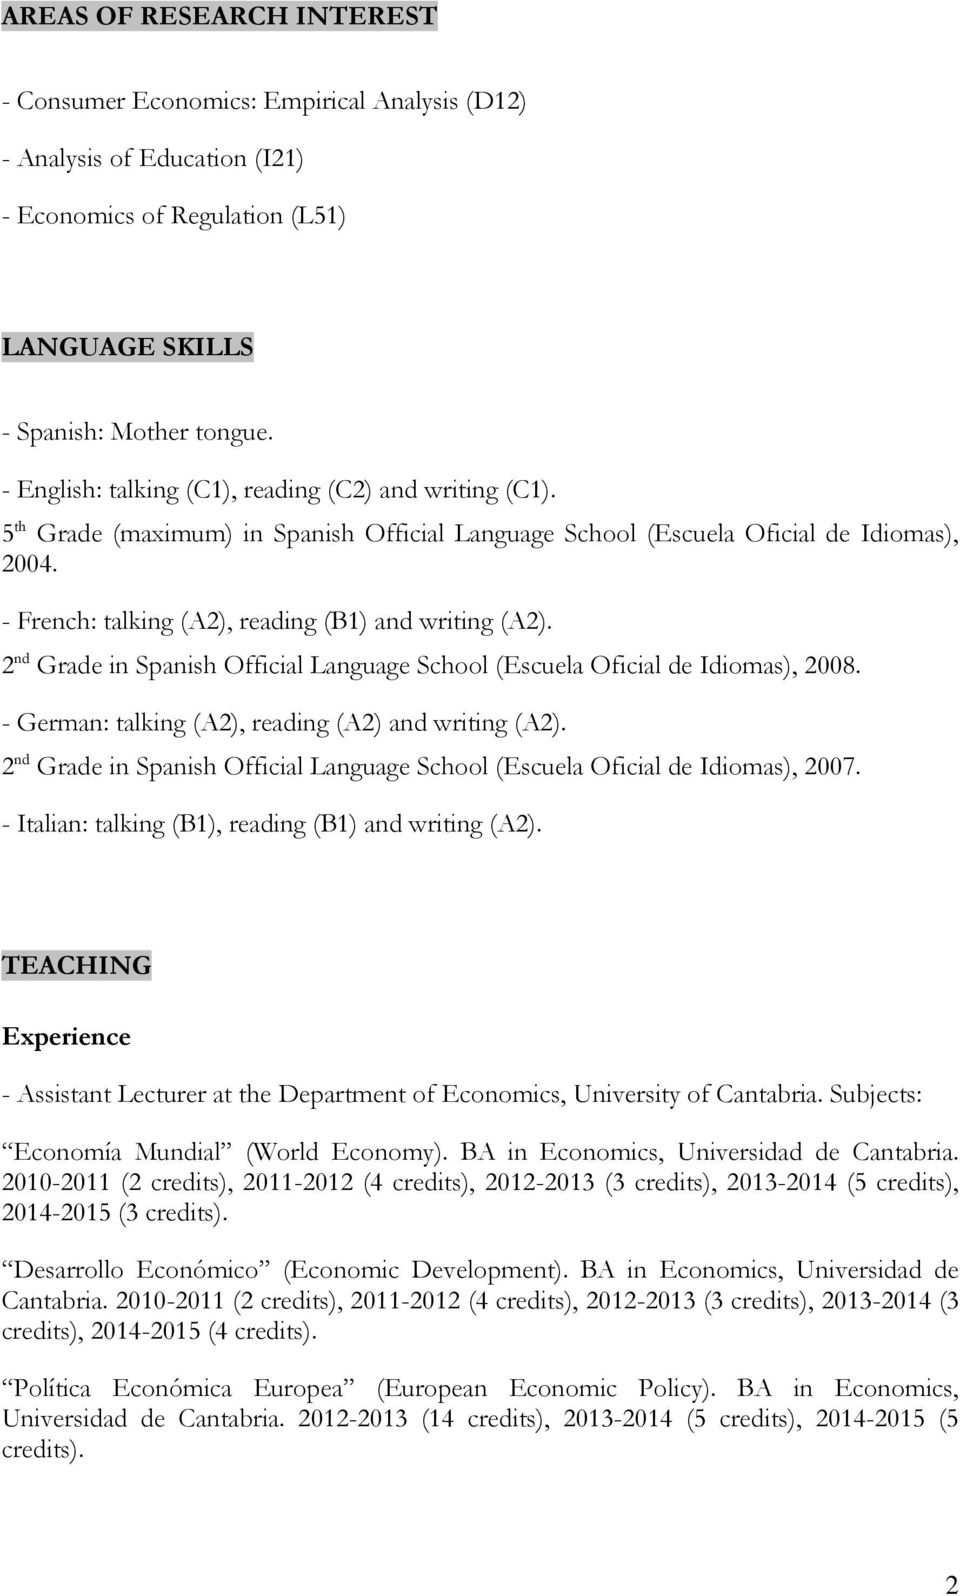 - French: talking (A2), reading (B1) and writing (A2). 2 nd Grade in Spanish Official Language School (Escuela Oficial de Idiomas), 2008. - German: talking (A2), reading (A2) and writing (A2).